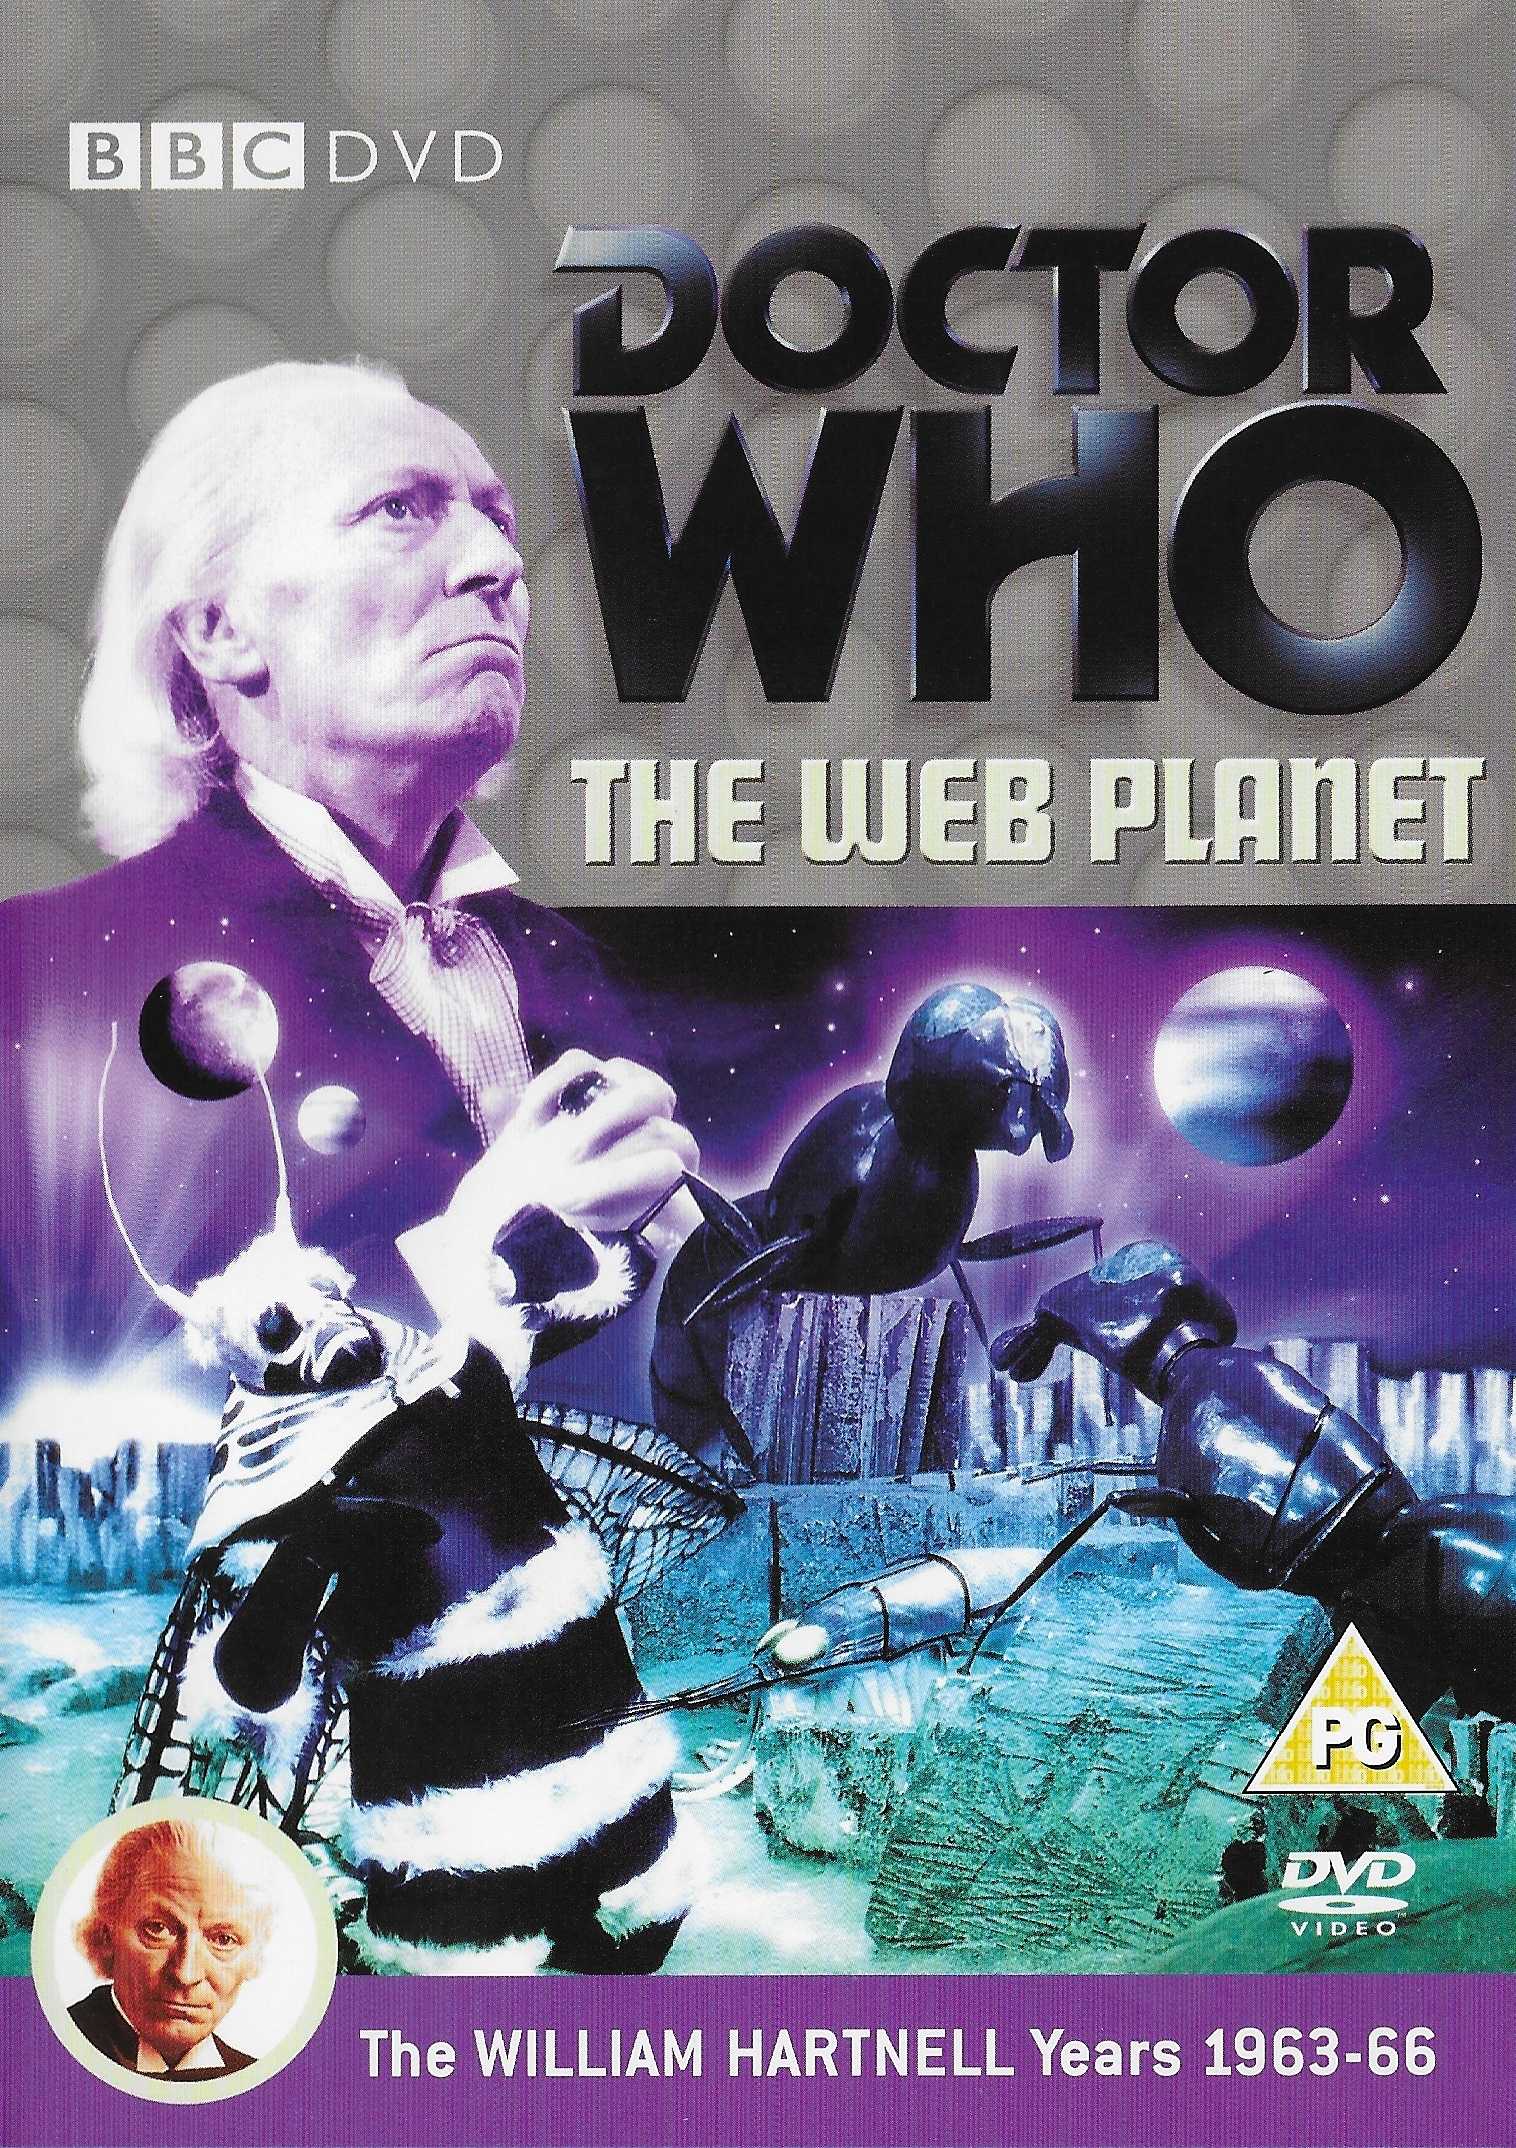 Picture of BBCDVD 1355 Doctor Who - The web planet by artist Bill Strutton from the BBC dvds - Records and Tapes library